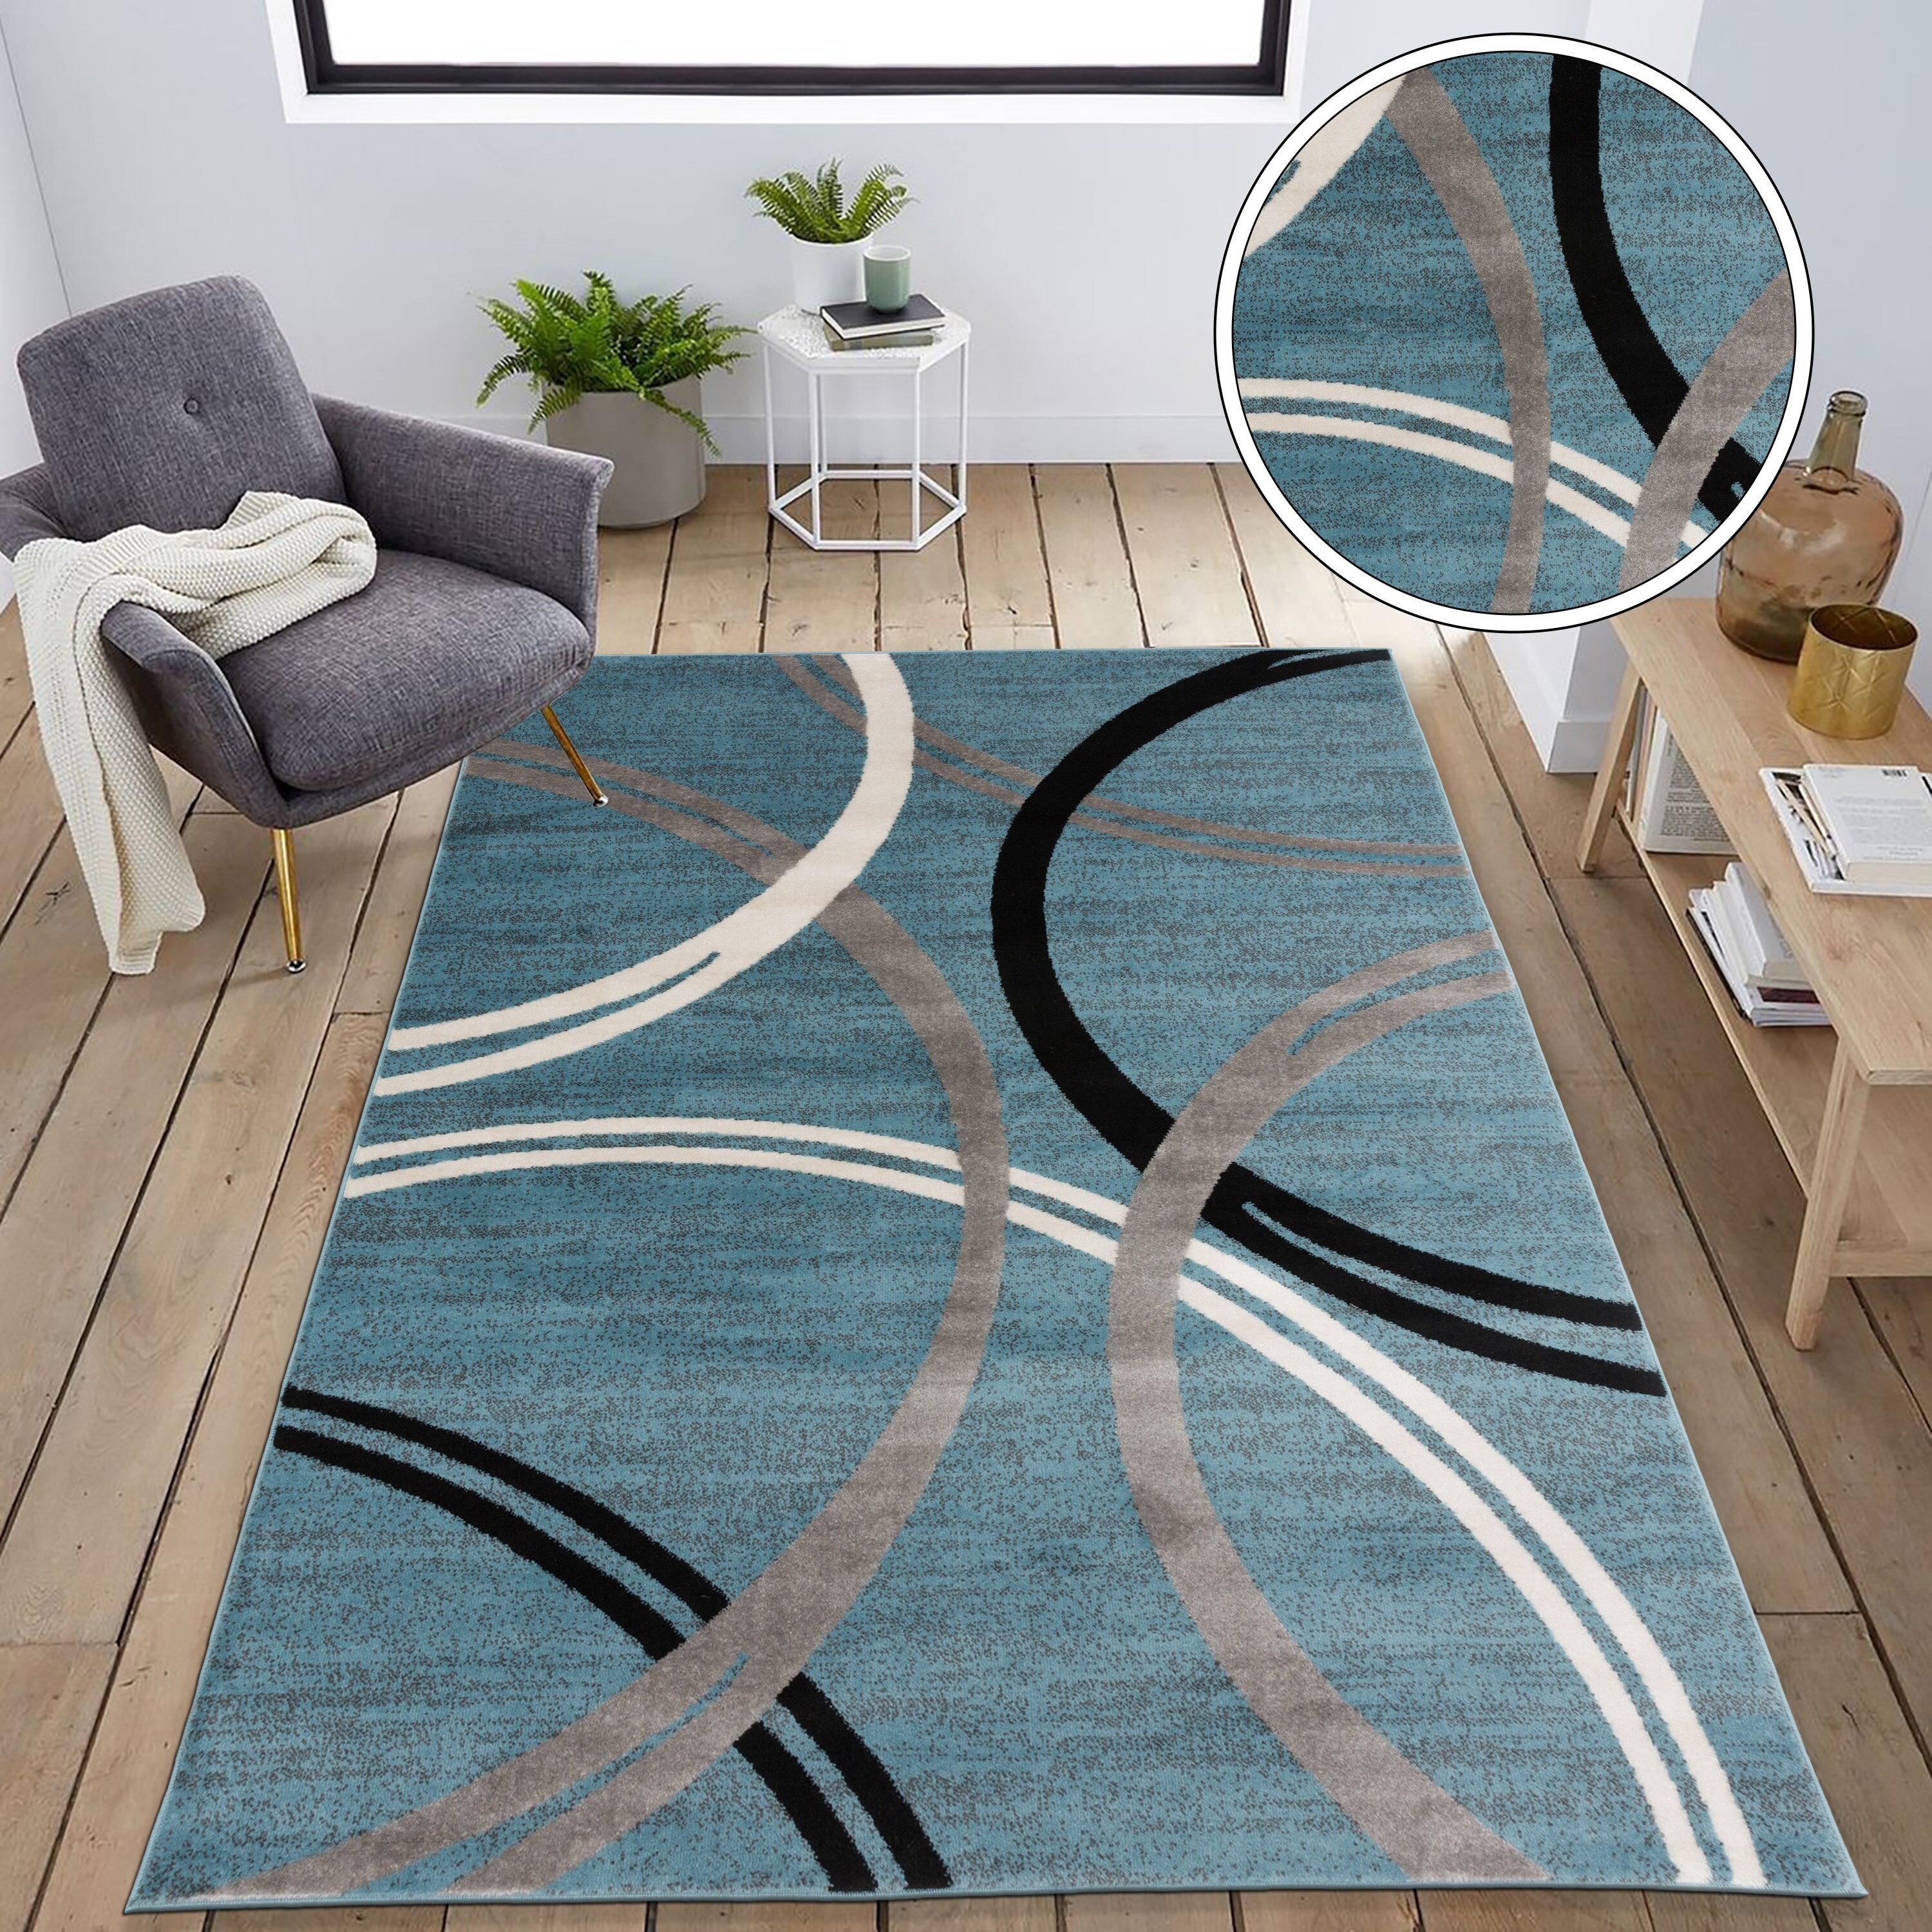 Rugshop Contemporary Abstract Circles Area Rug 6'6 x 9' Yellow 